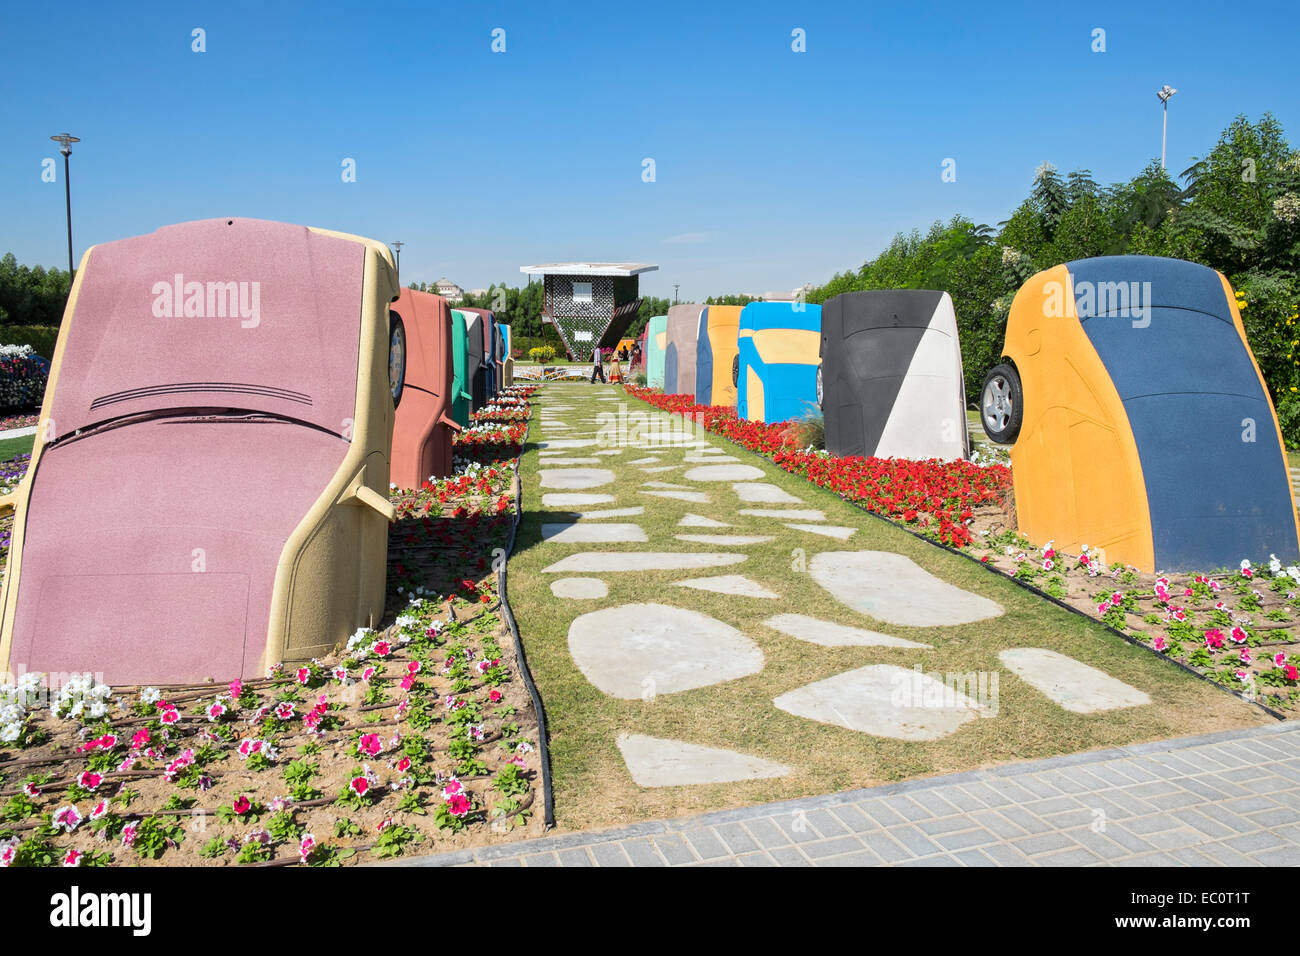 View of flower displays with model car sculptures at  Miracle Garden the world's biggest flower garden in Dubai United Arab Emir Stock Photo